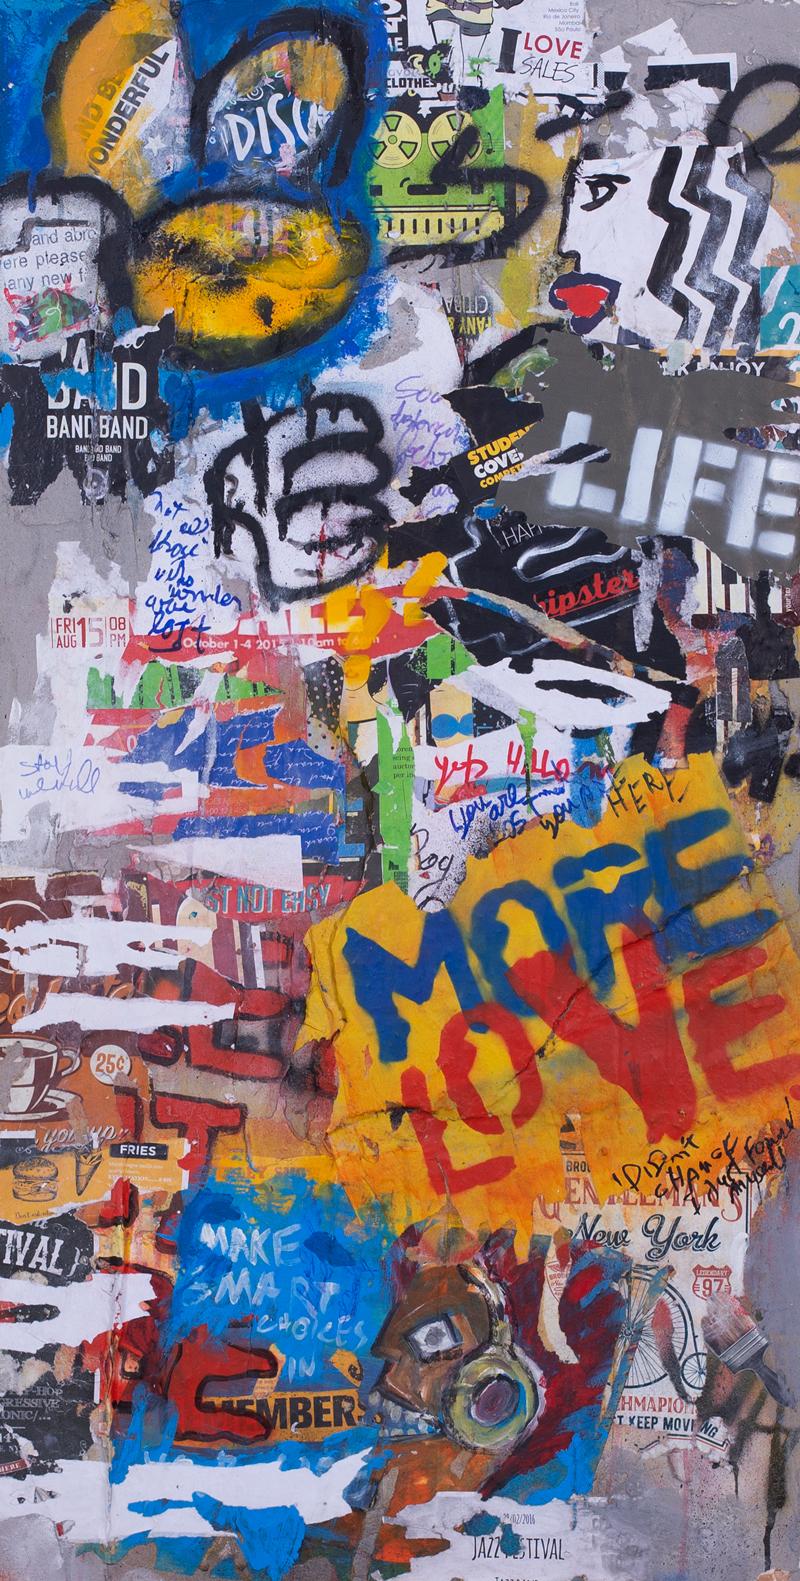 Shlomo Hauser, "More Love", acrylic, spray paint, collage on concrete and wood